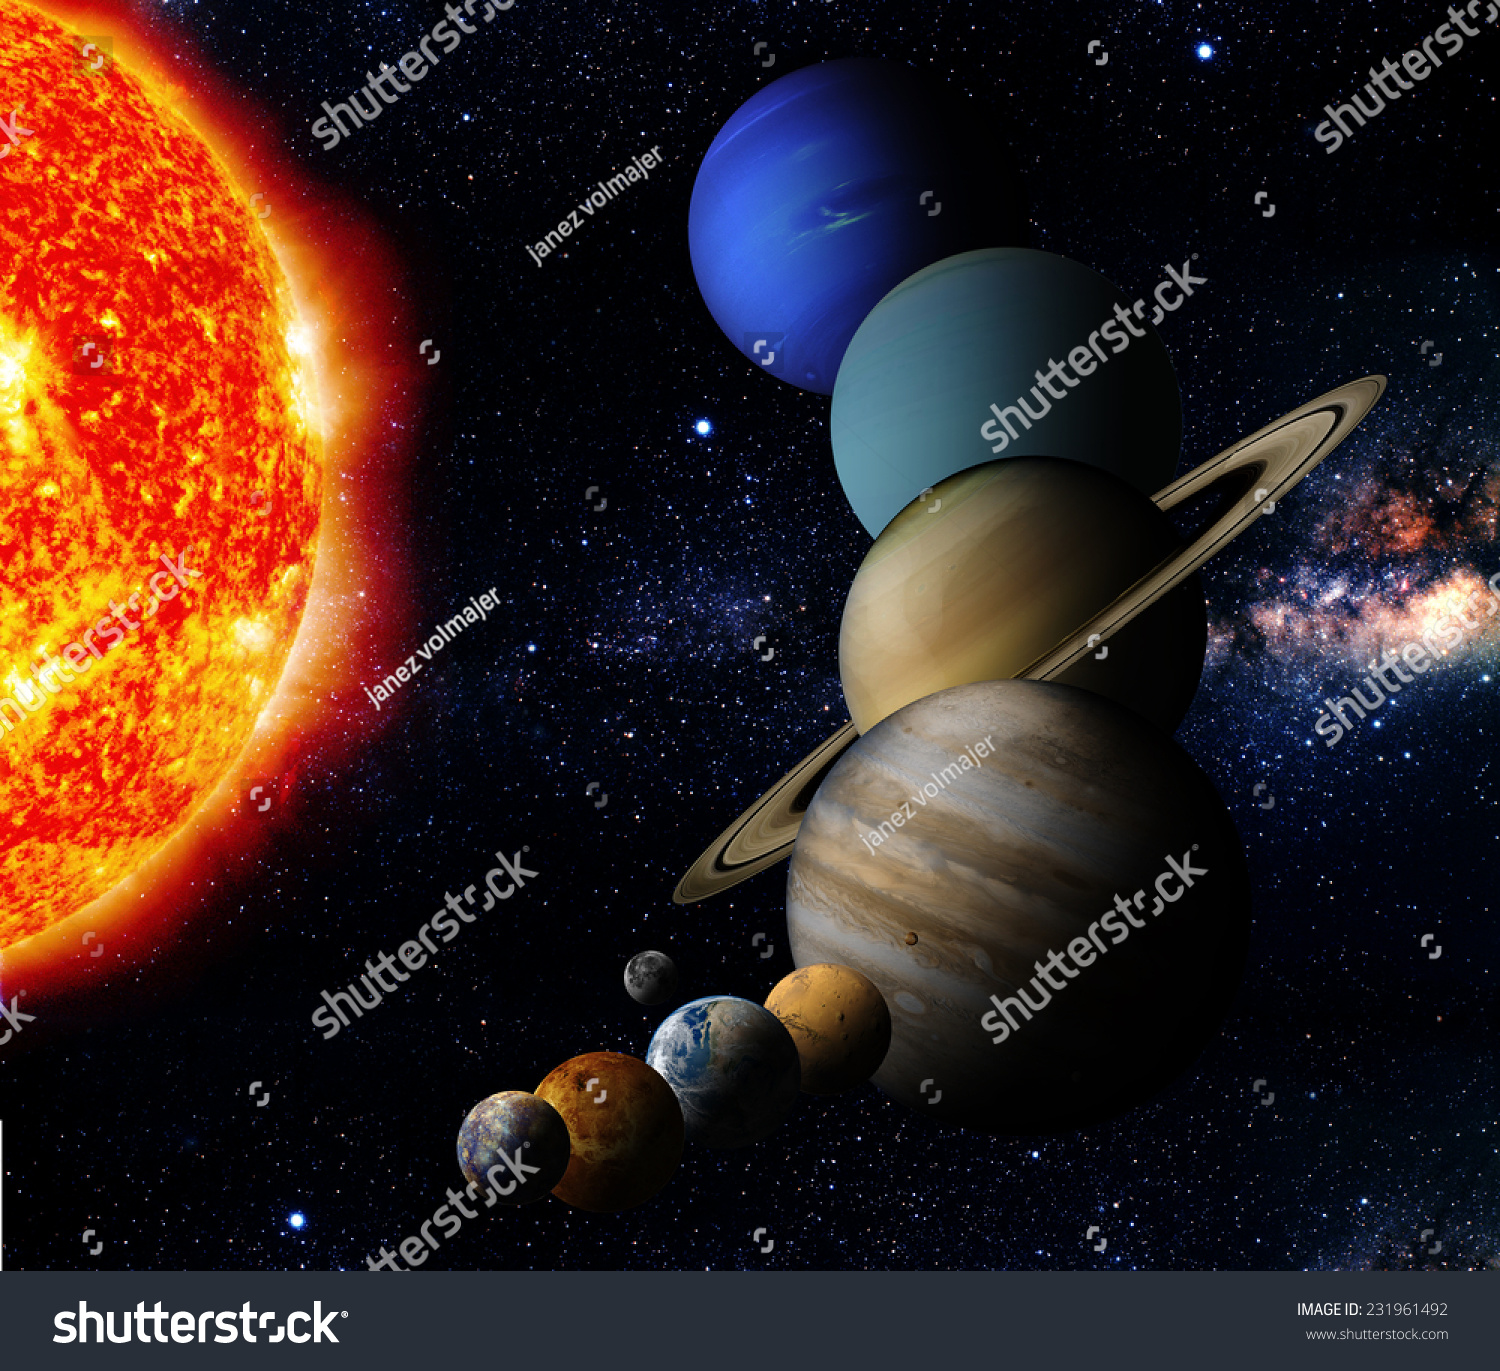 The Sun And Nine Planets Of Our System Orbiting Elements Of This Image ...